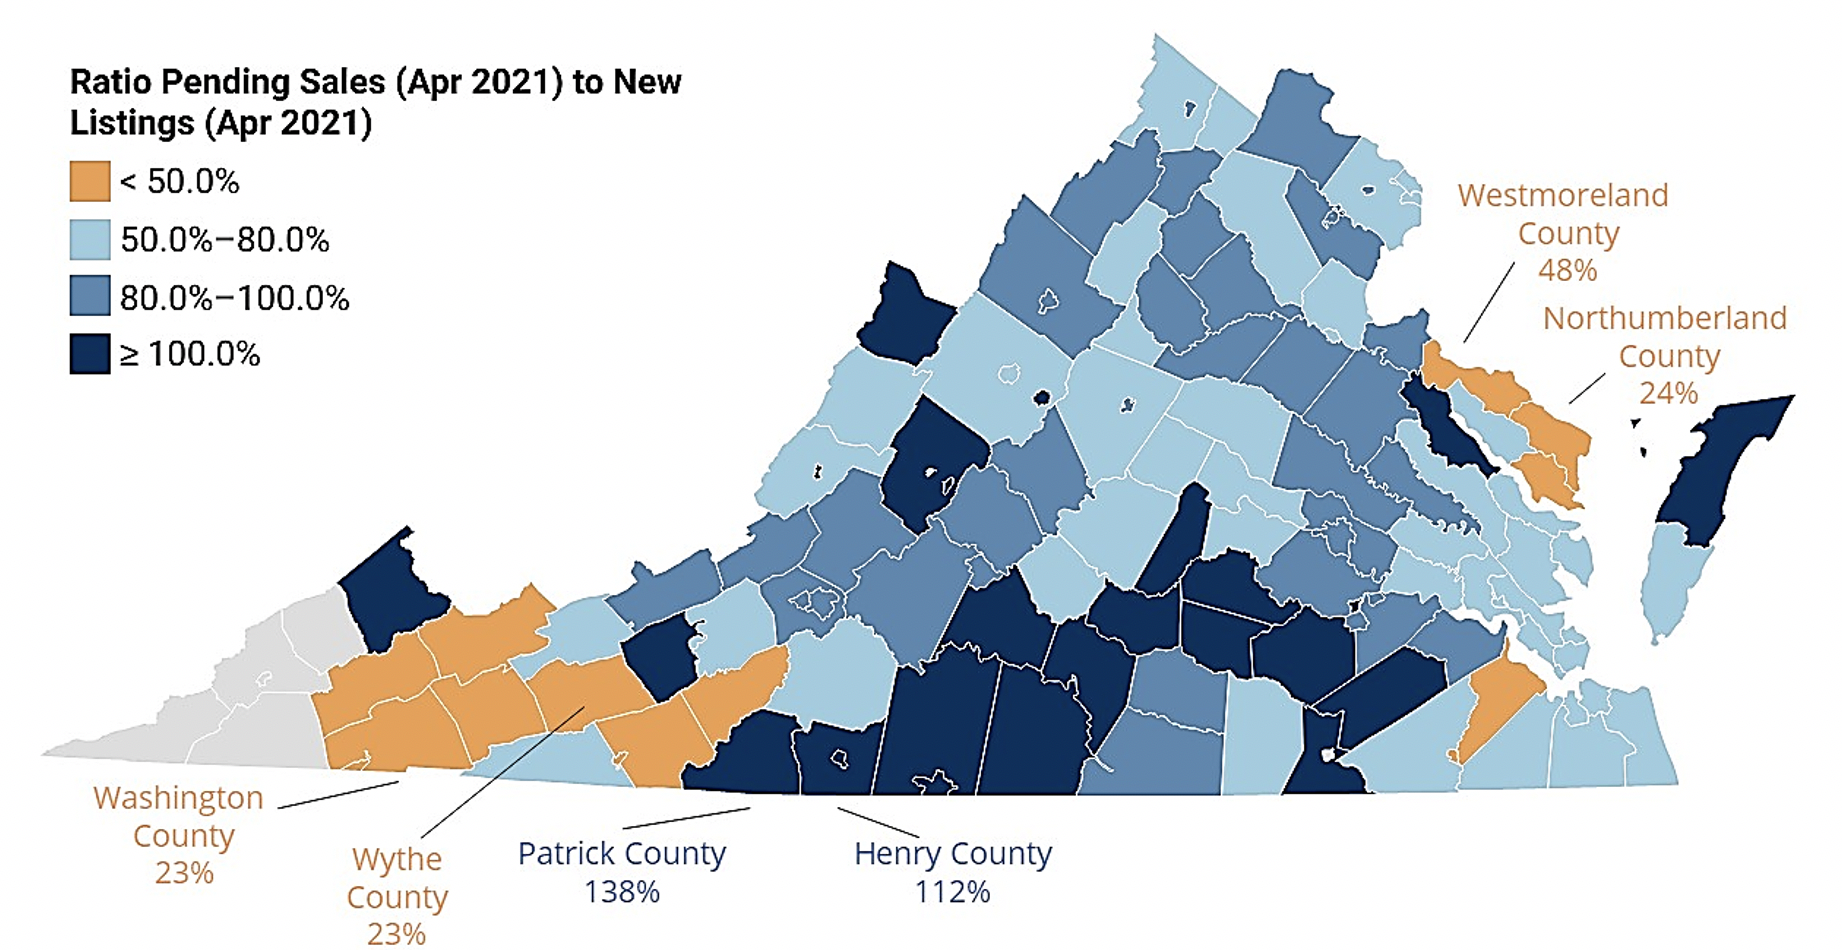 Where is the Hyperactive Housing Market Most Frantic? Virginia REALTORS®